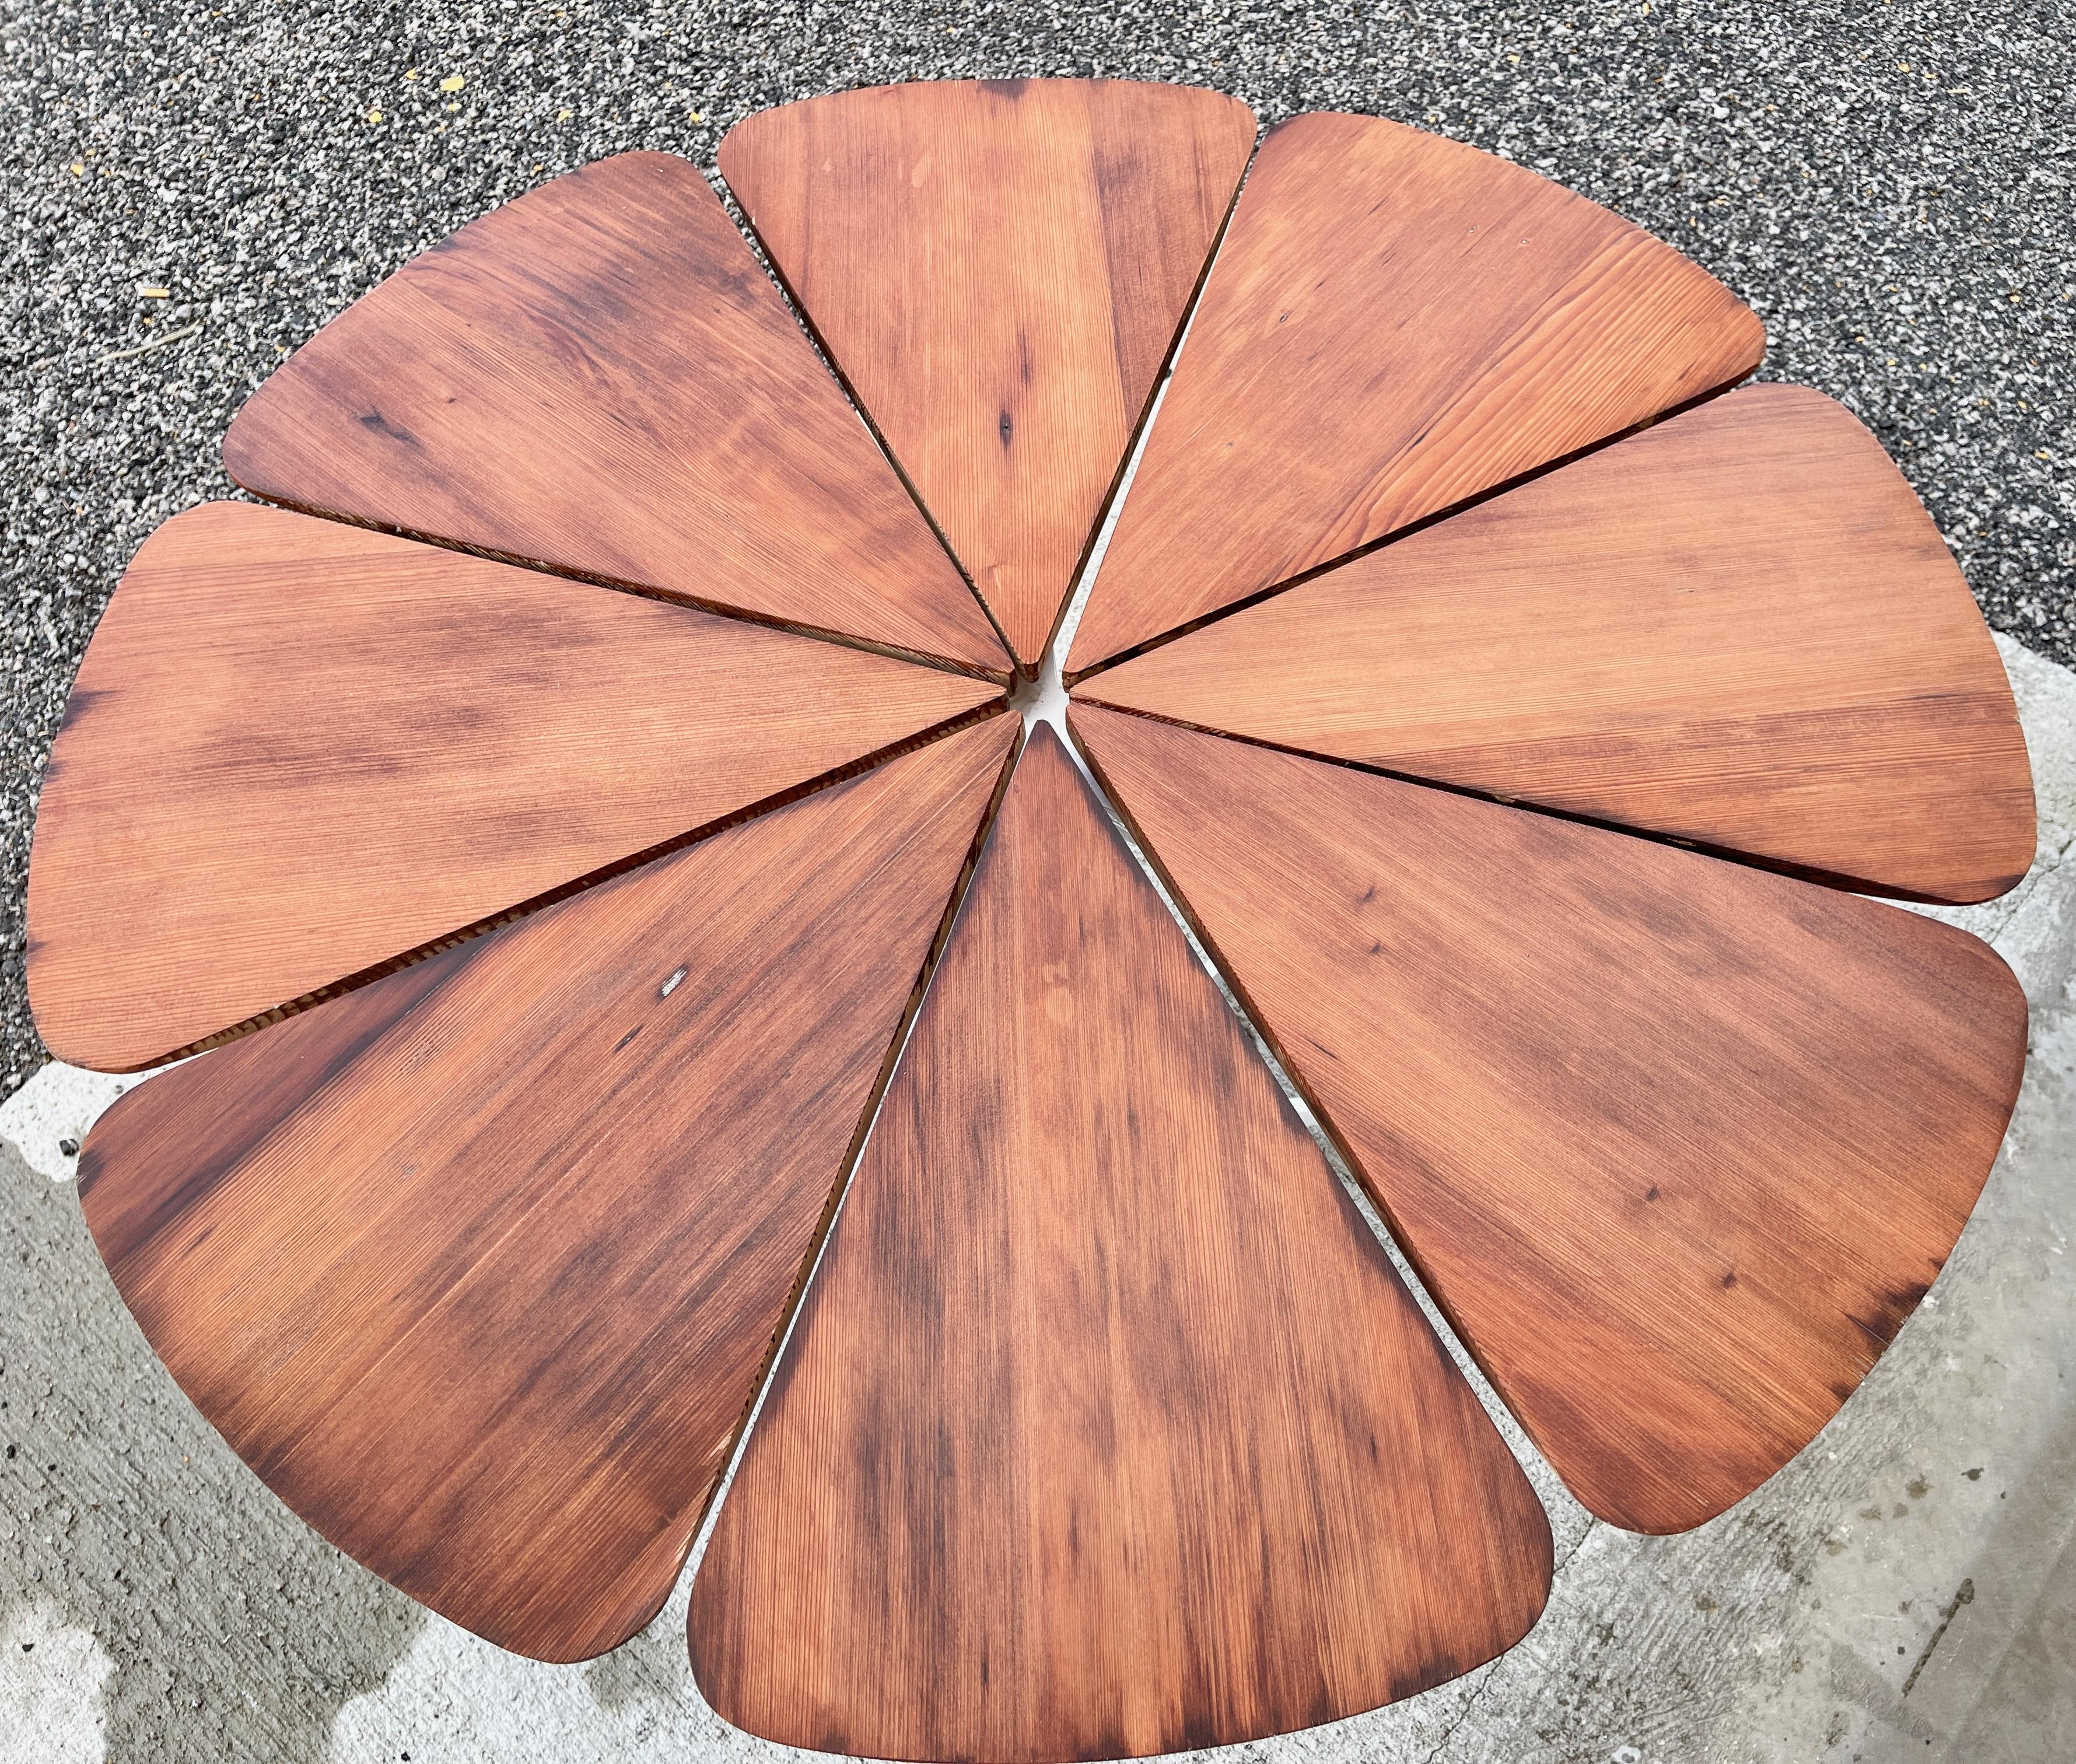 1961 Petal Dining Table by Richard Schultz for Knoll in California Redwood For Sale 8